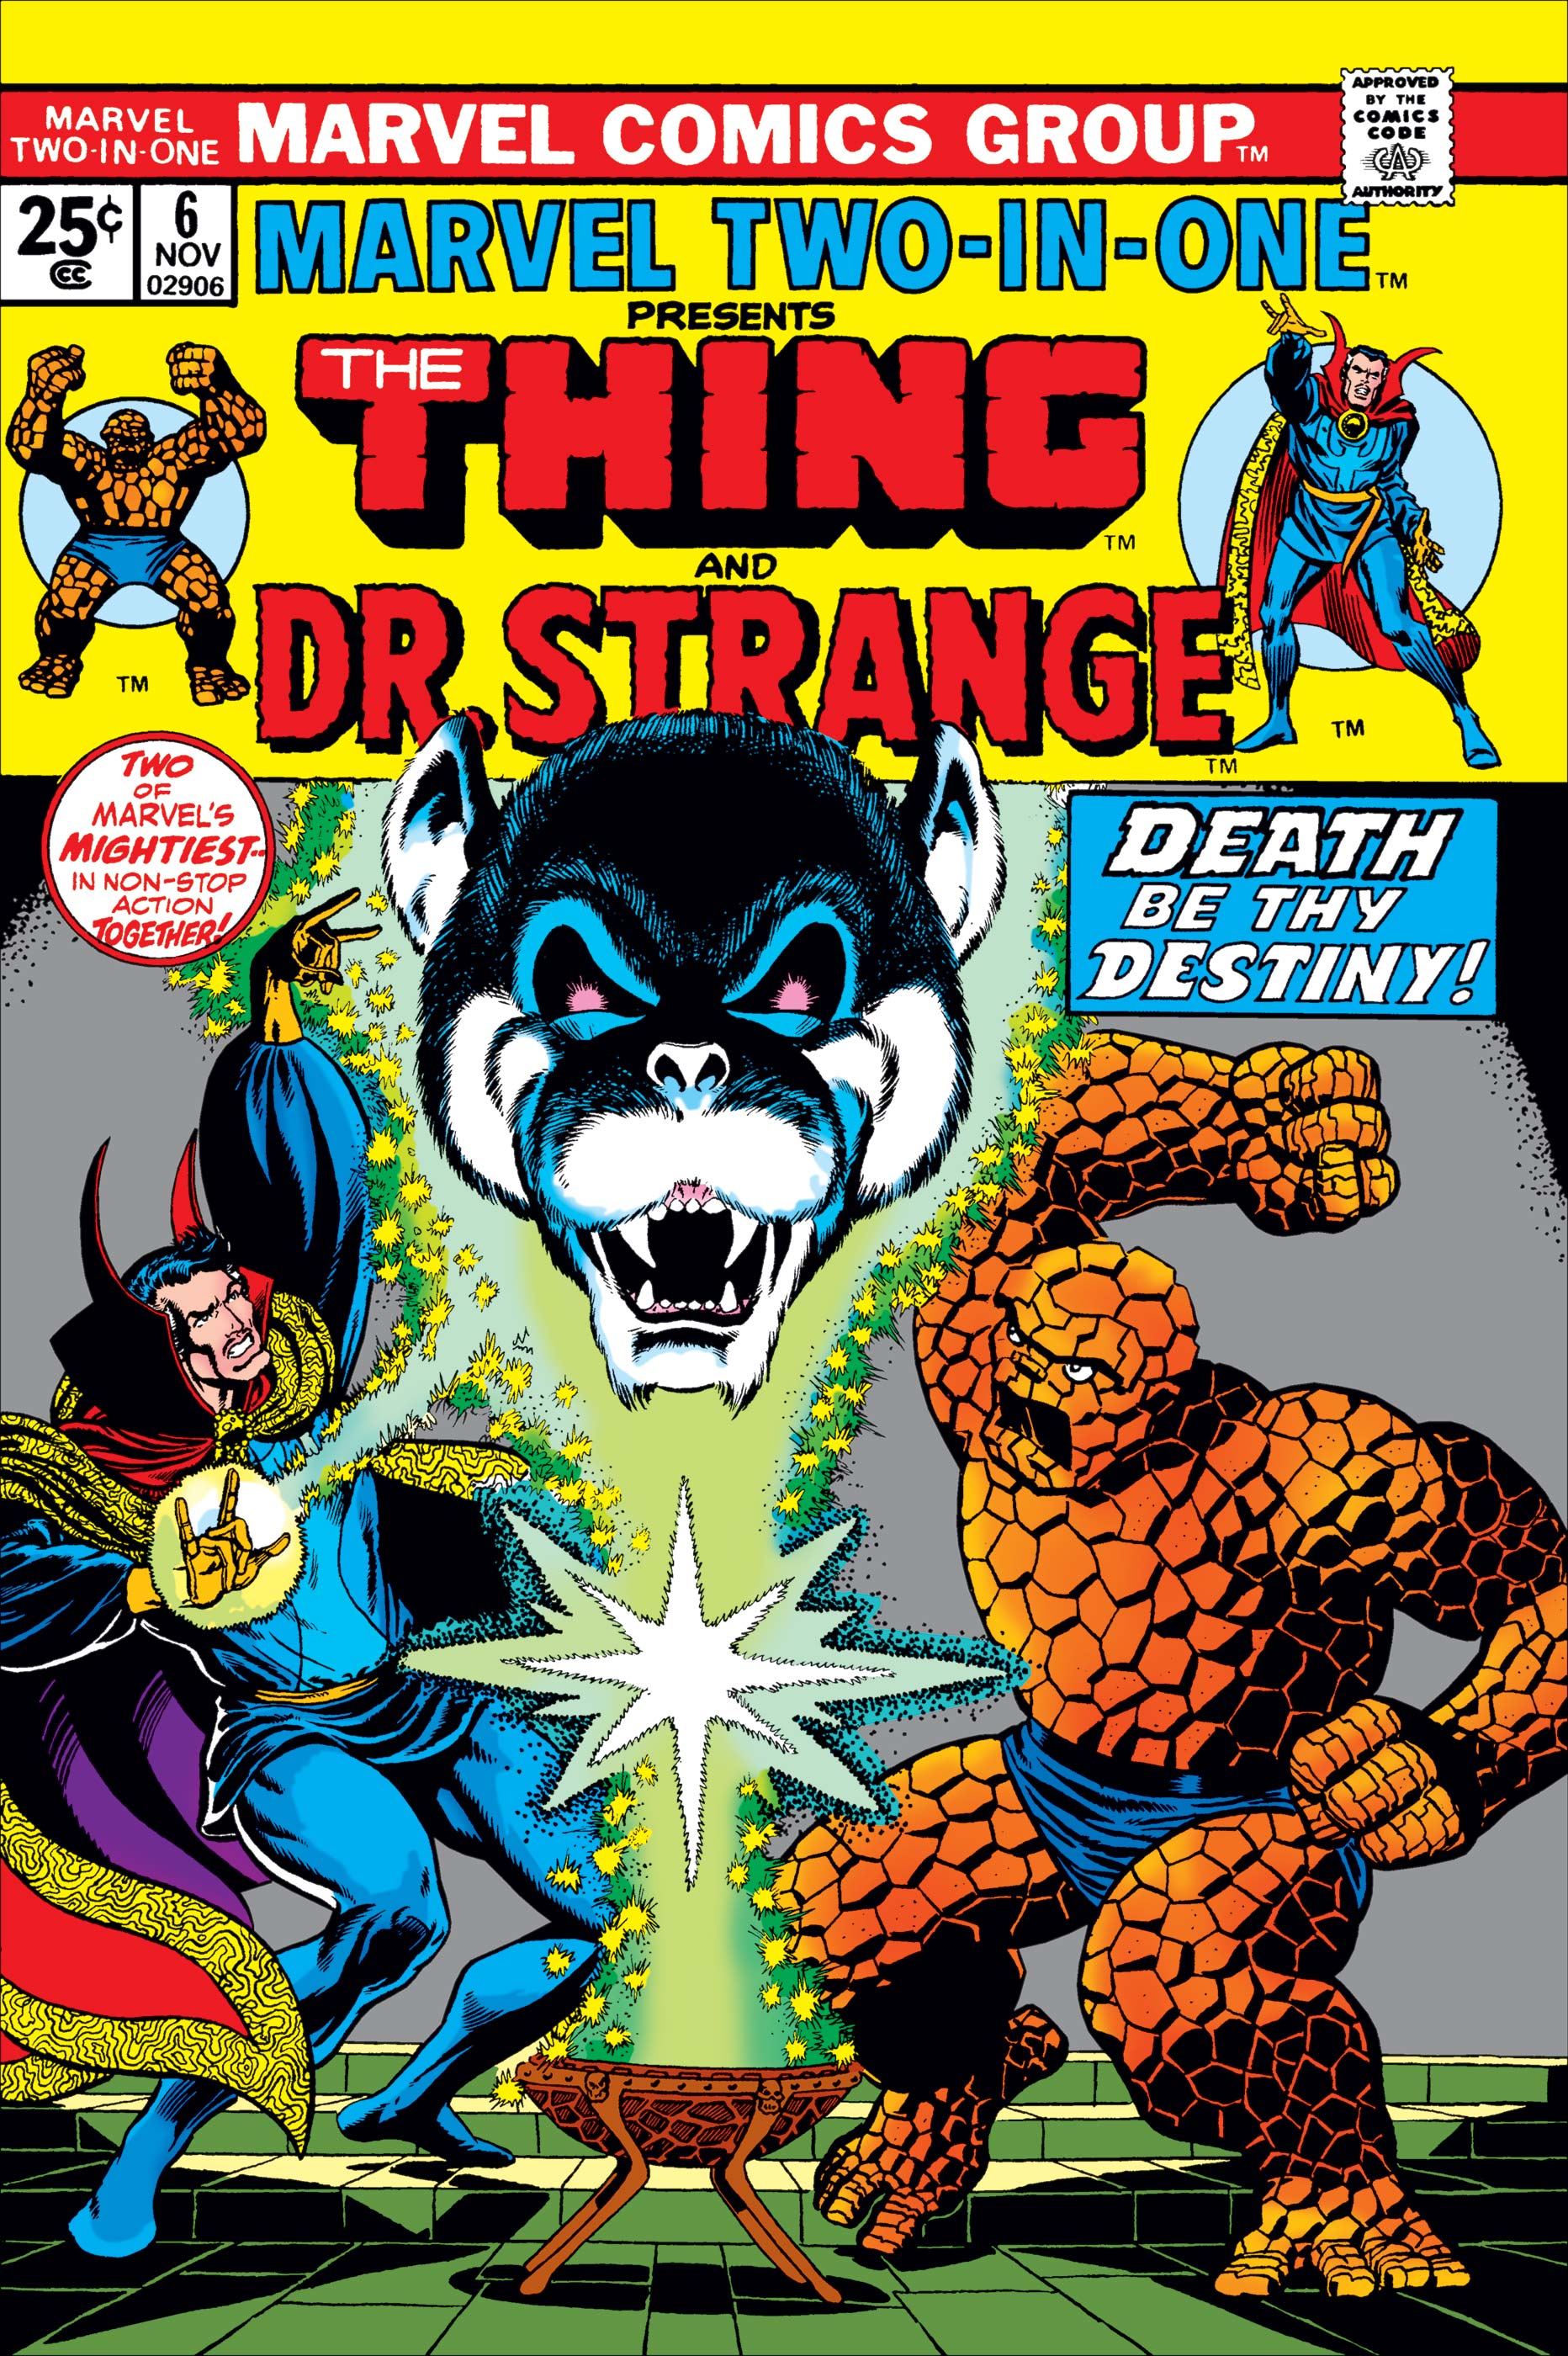 Marvel Two-in-One (1974) #6